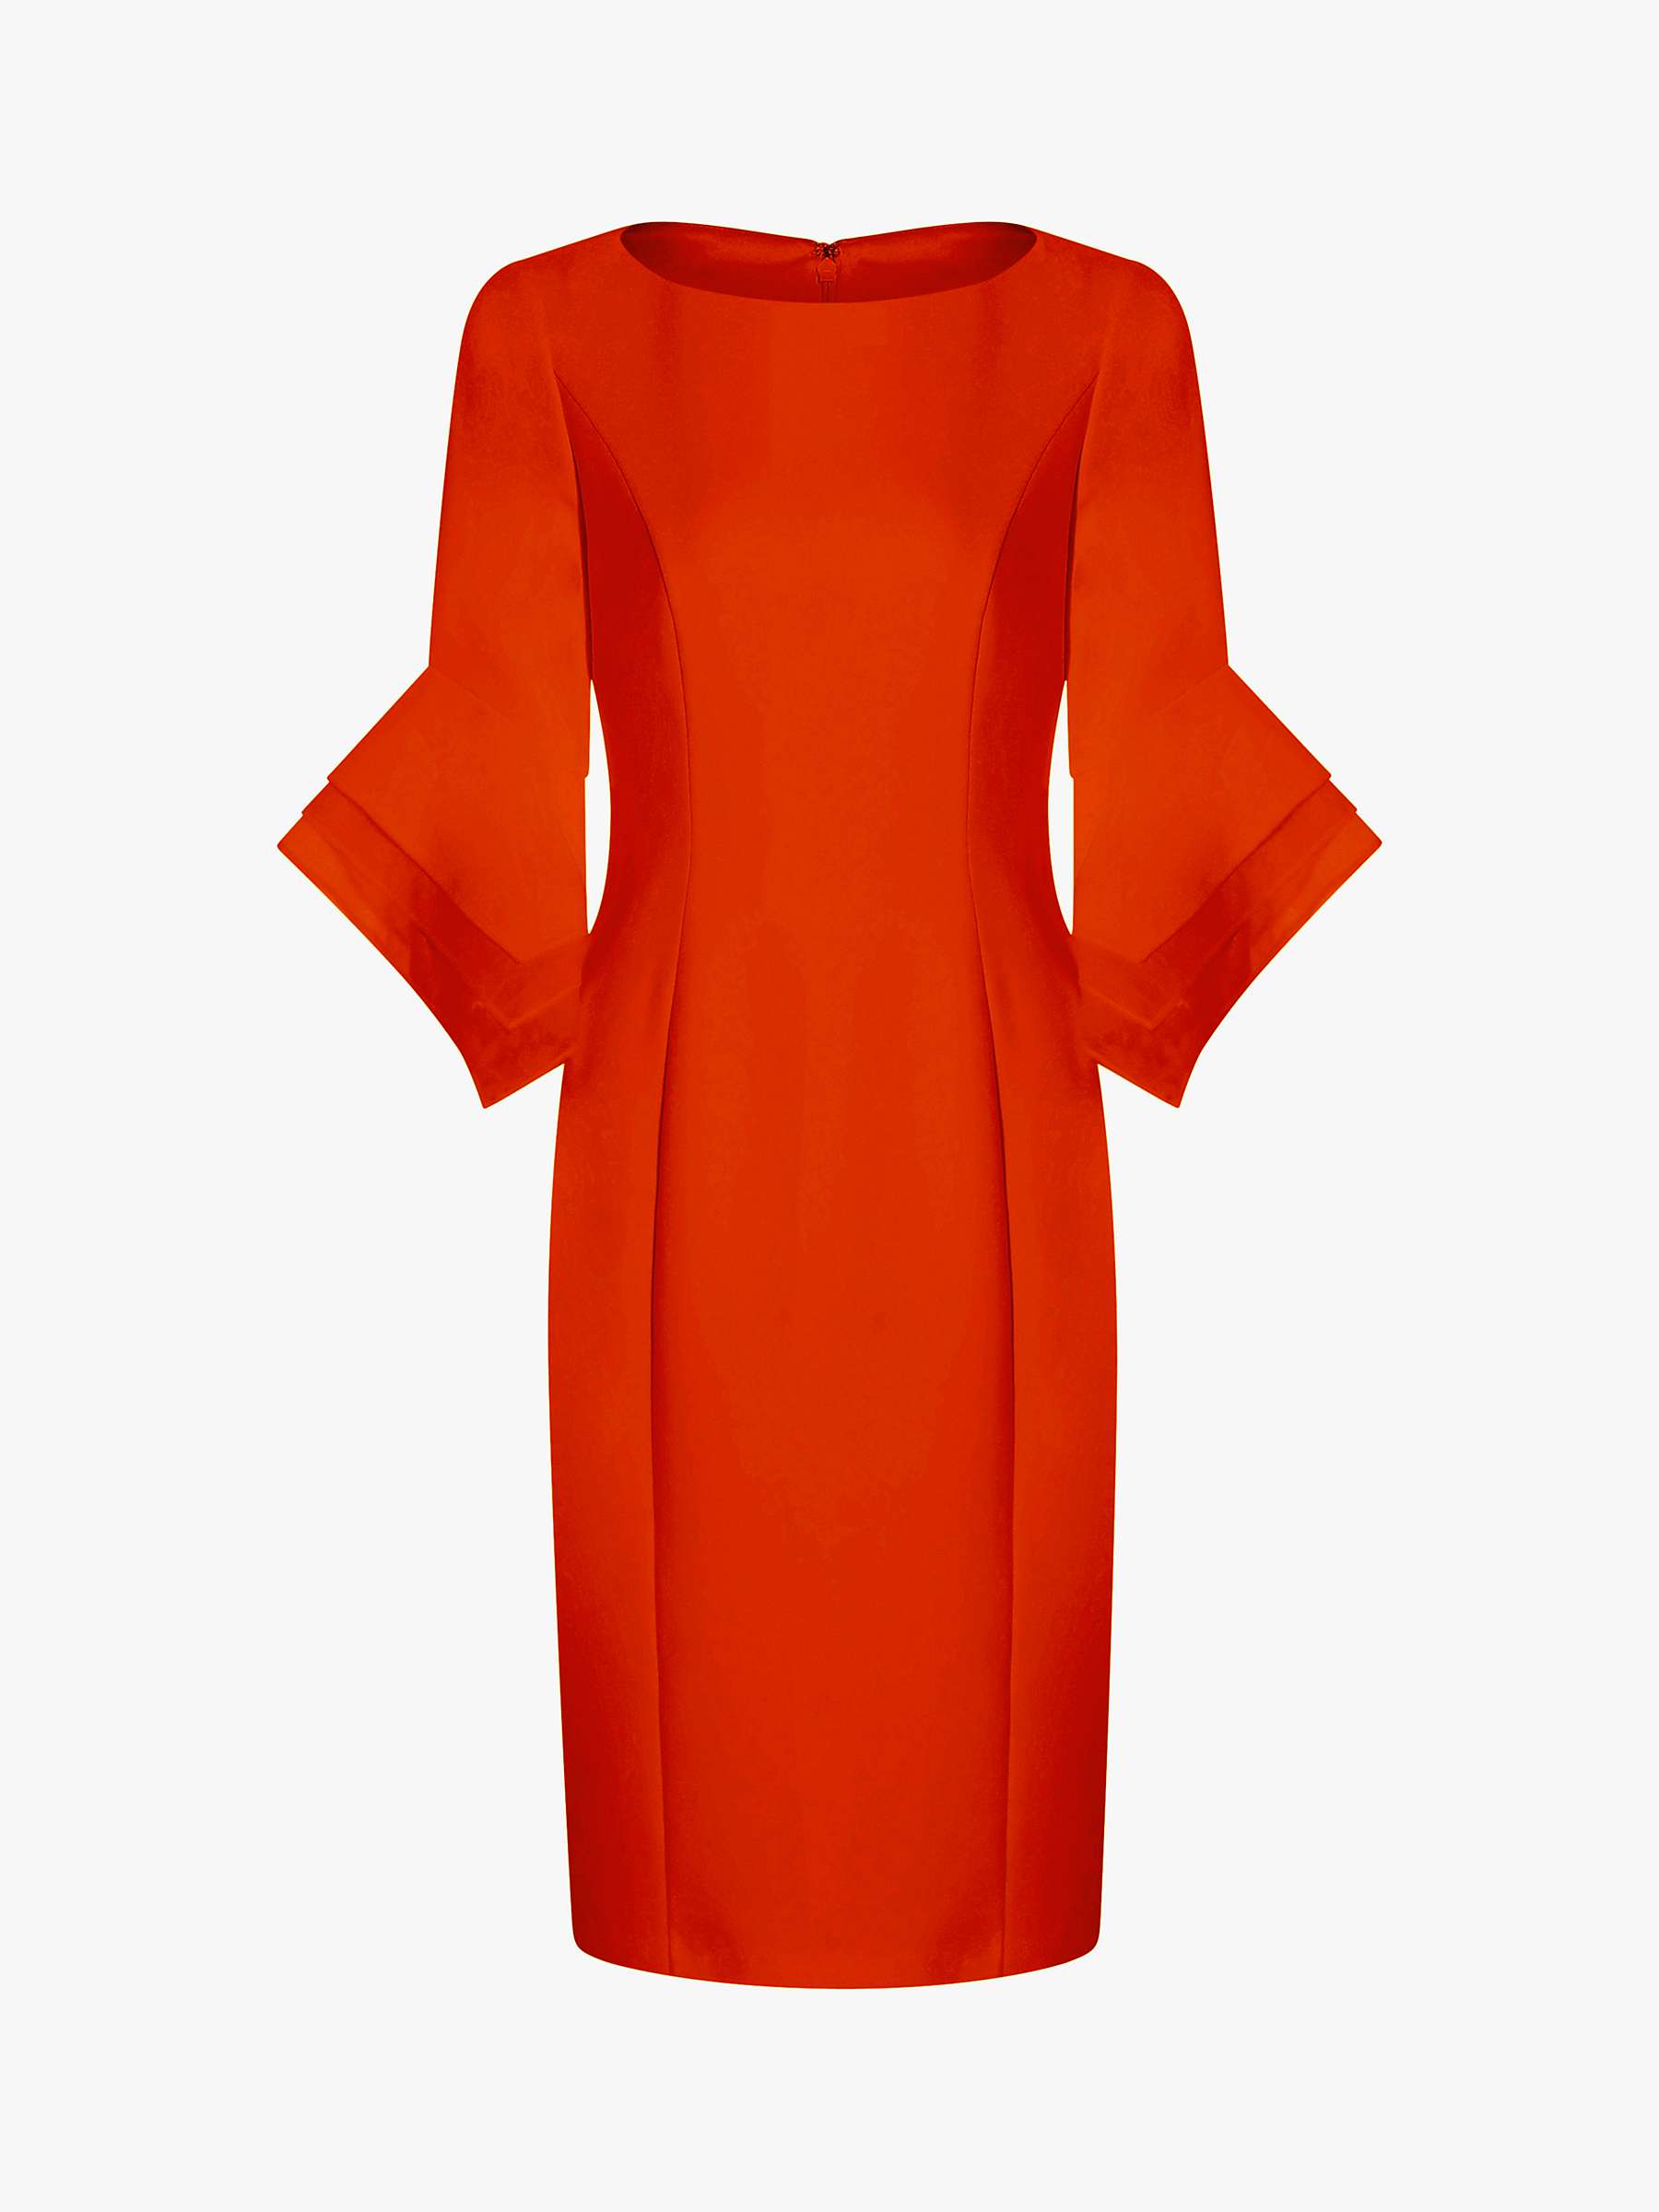 Buy Adrianna Papell Crepe Tailored Dress Online at johnlewis.com